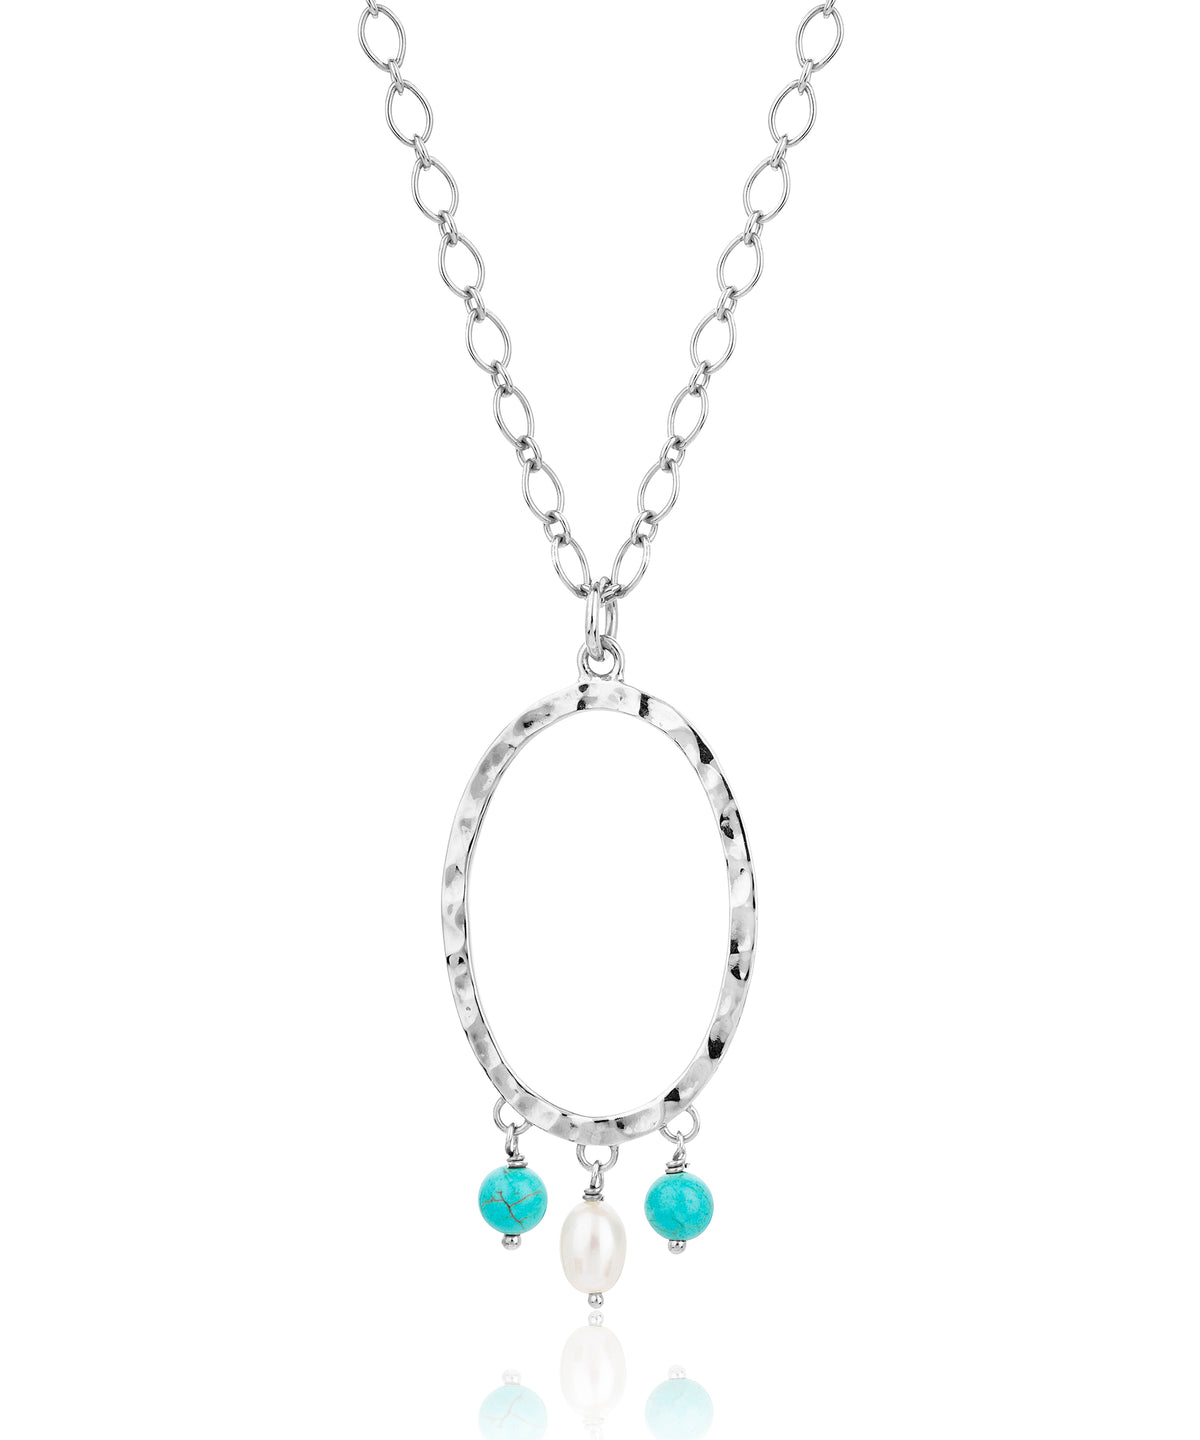 Silver oval pendant necklace with pearl and turquoise charm details